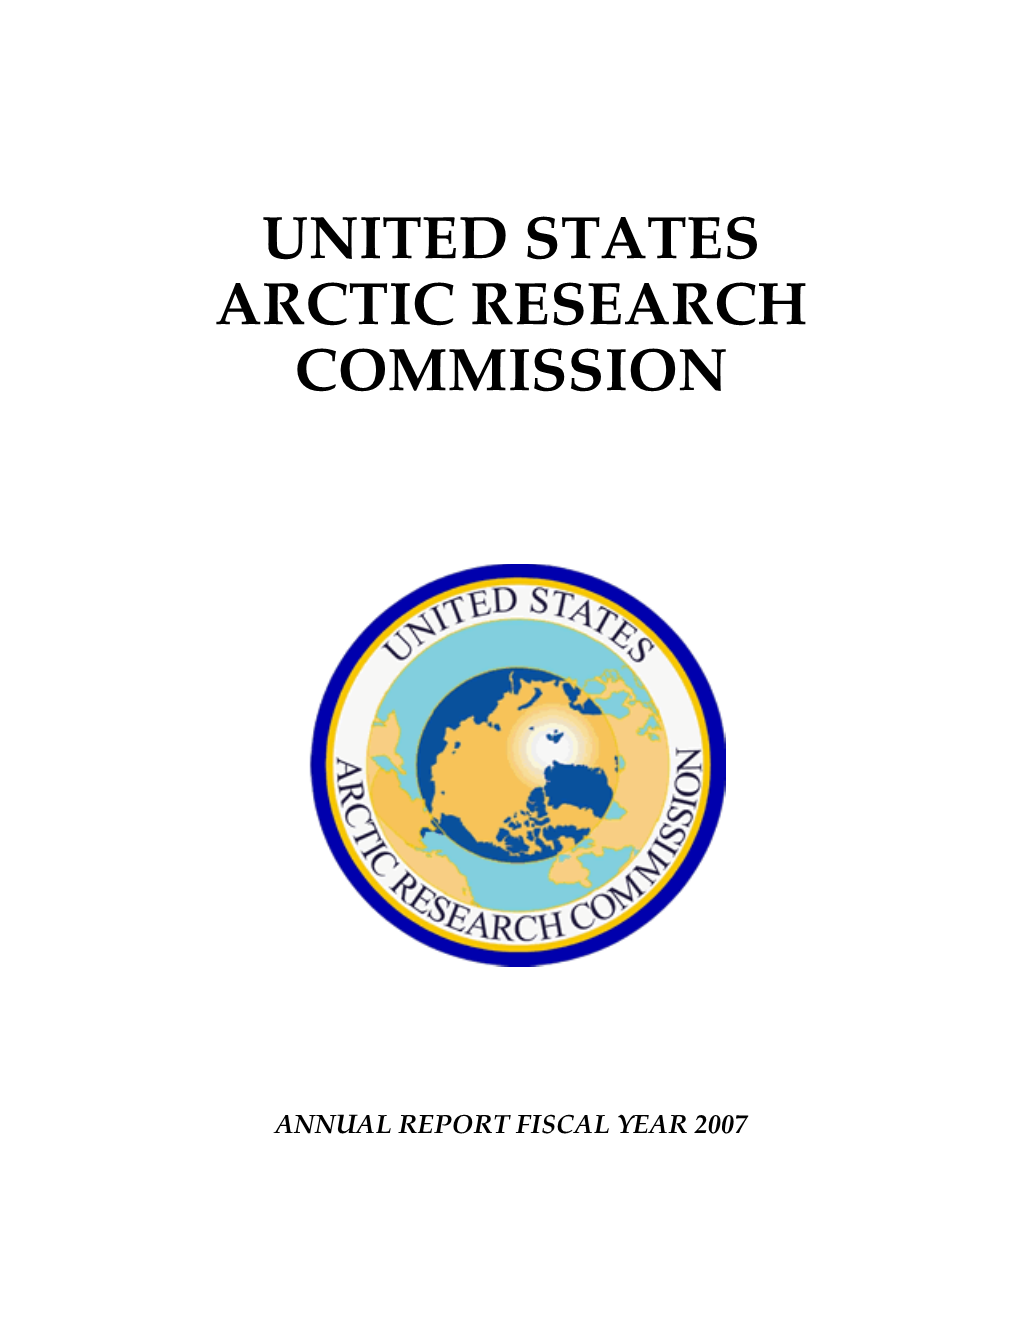 United States Arctic Research Commission